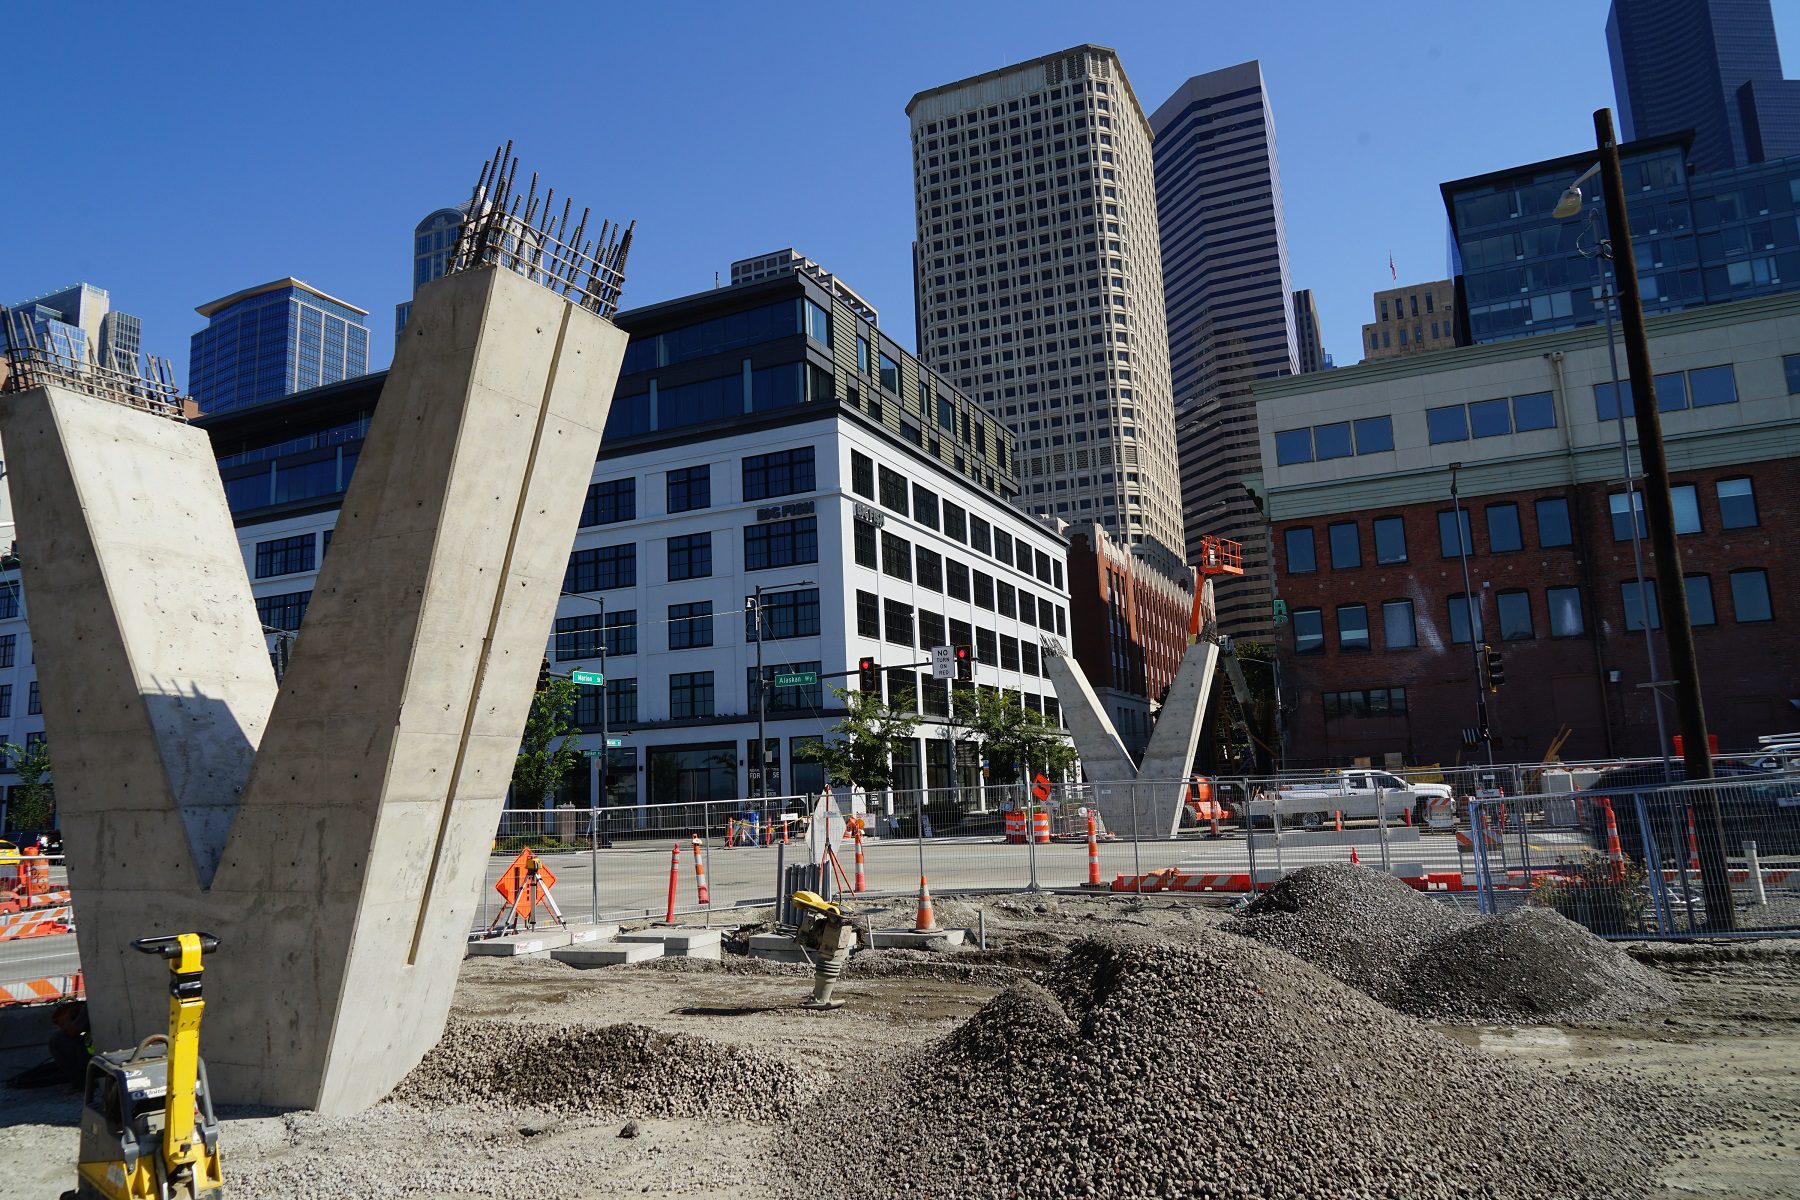 Looking west at the construction site in late August with the new Marion St pedestrian bridge columns in place. Large piles of gravel are in the foreground, with large, tall buildings in the center and background.